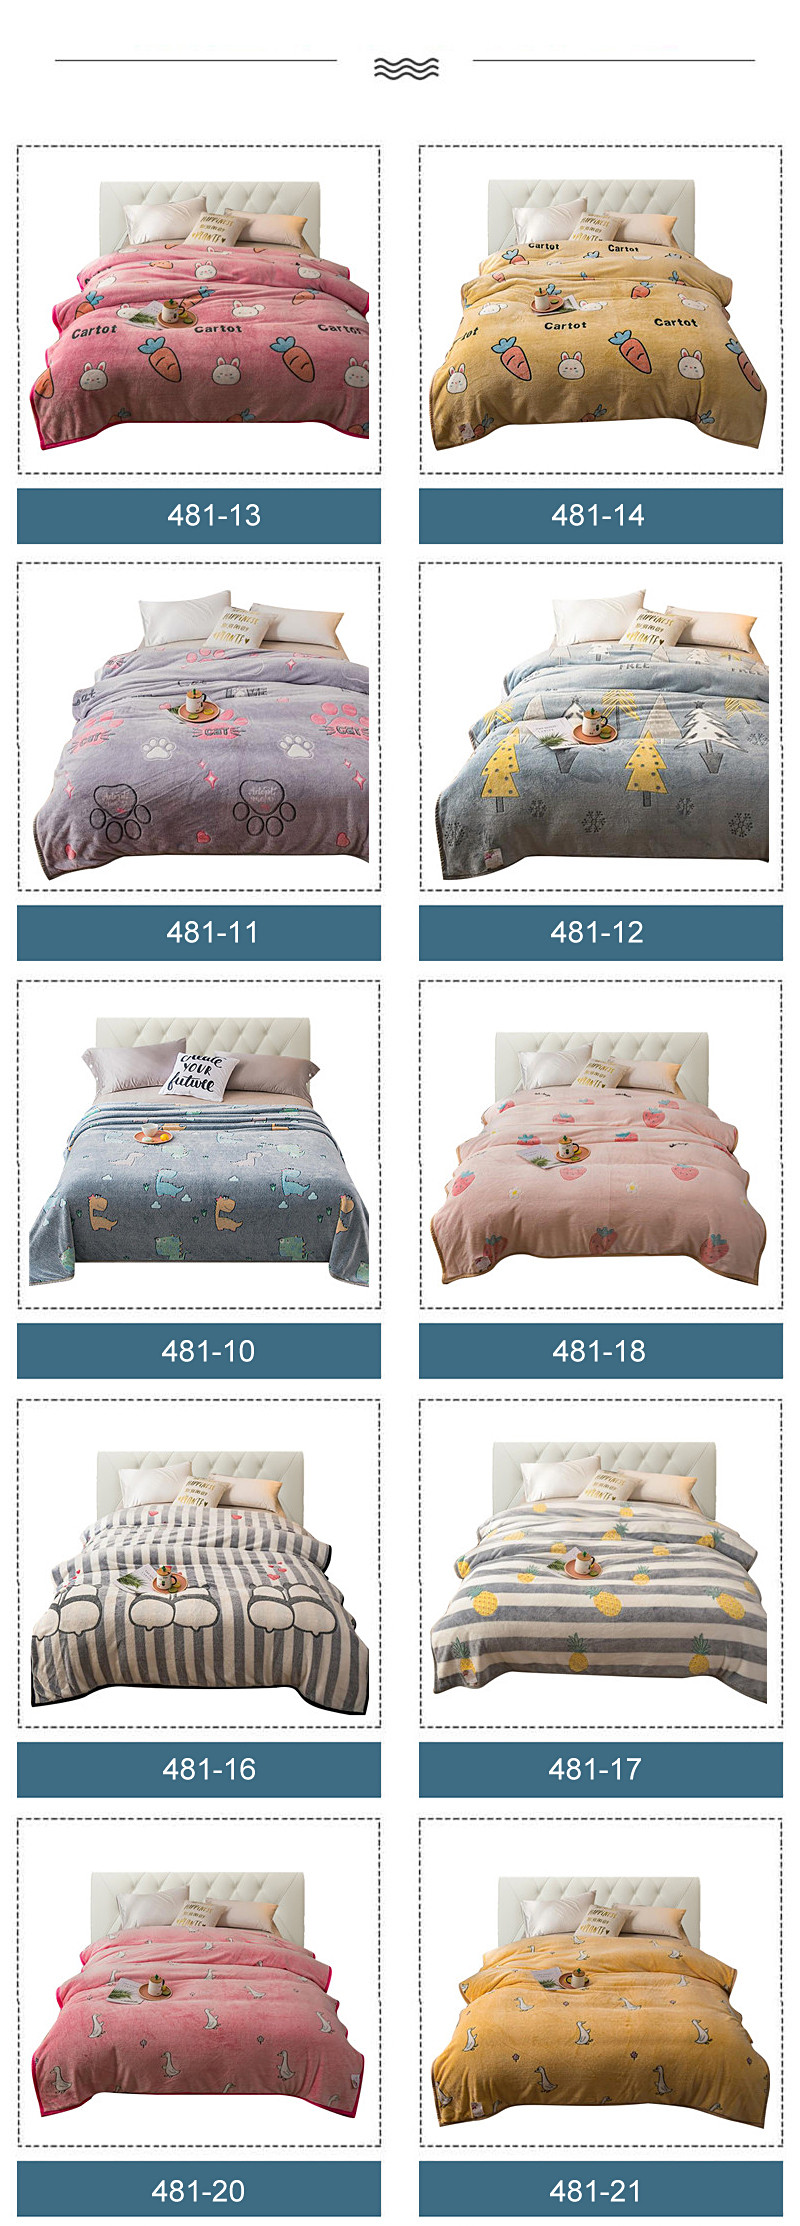 Dual-Sided For King Bedding Blanket